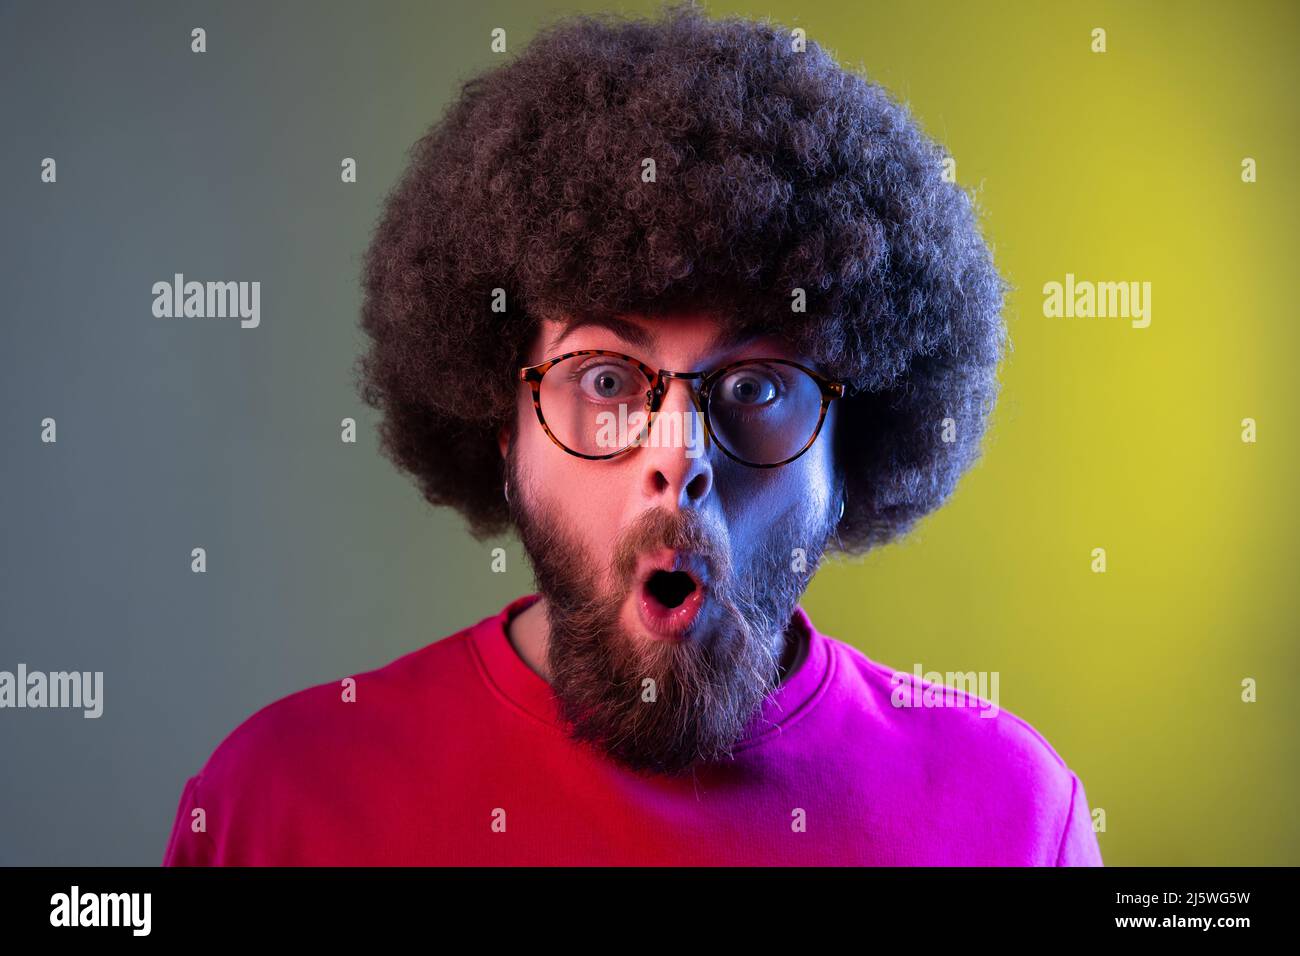 Hipster man with Afro hairstyle standing with mouth open in surprise, has shocked expression, unbelievable news, wearing red sweatshirt. Indoor studio shot isolated on colorful neon light background. Stock Photo